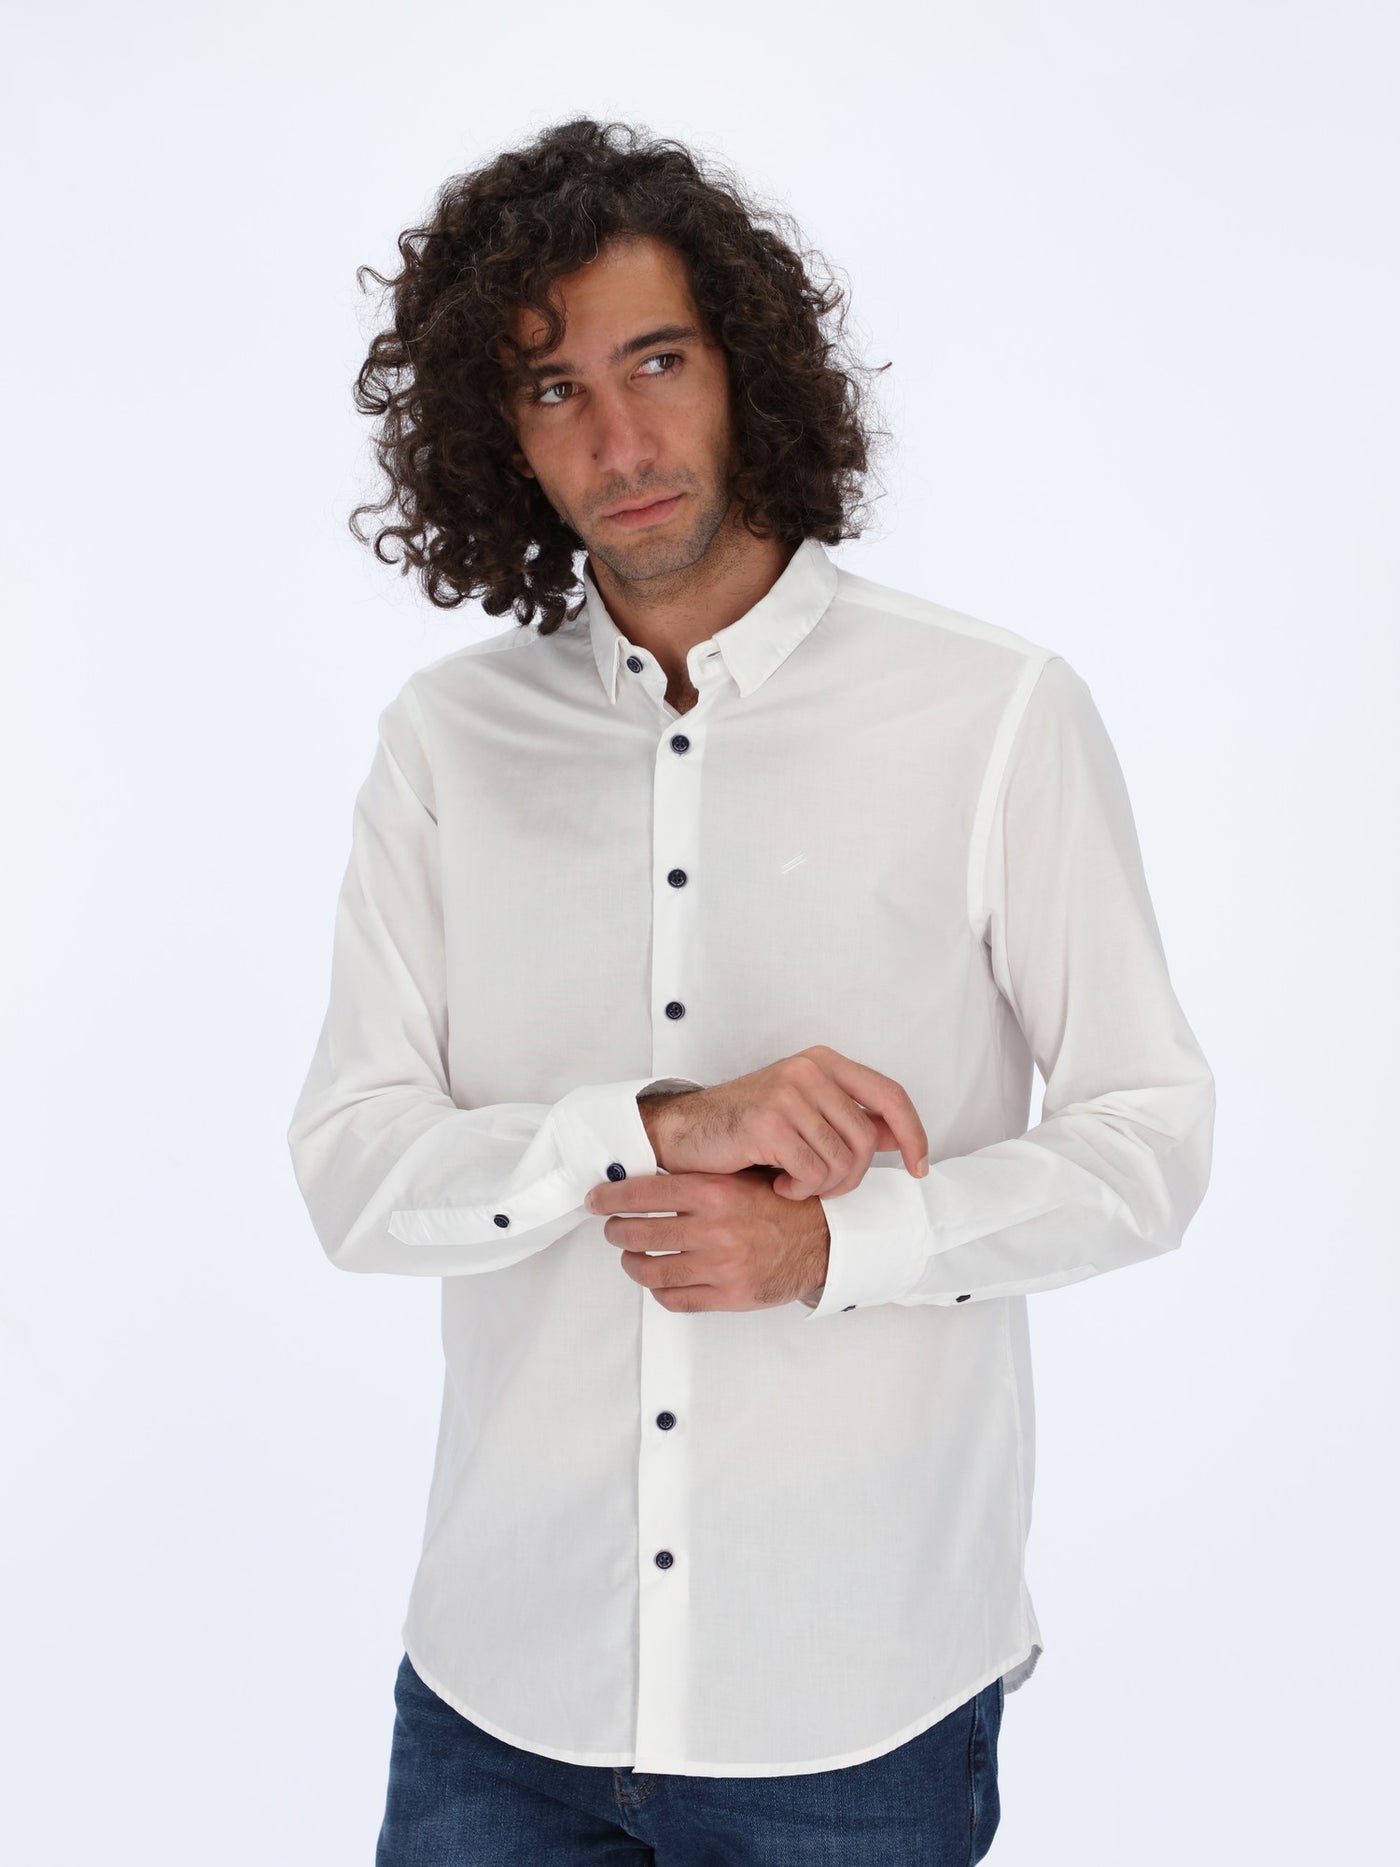 Plain Shirt with Contrasting Buttons